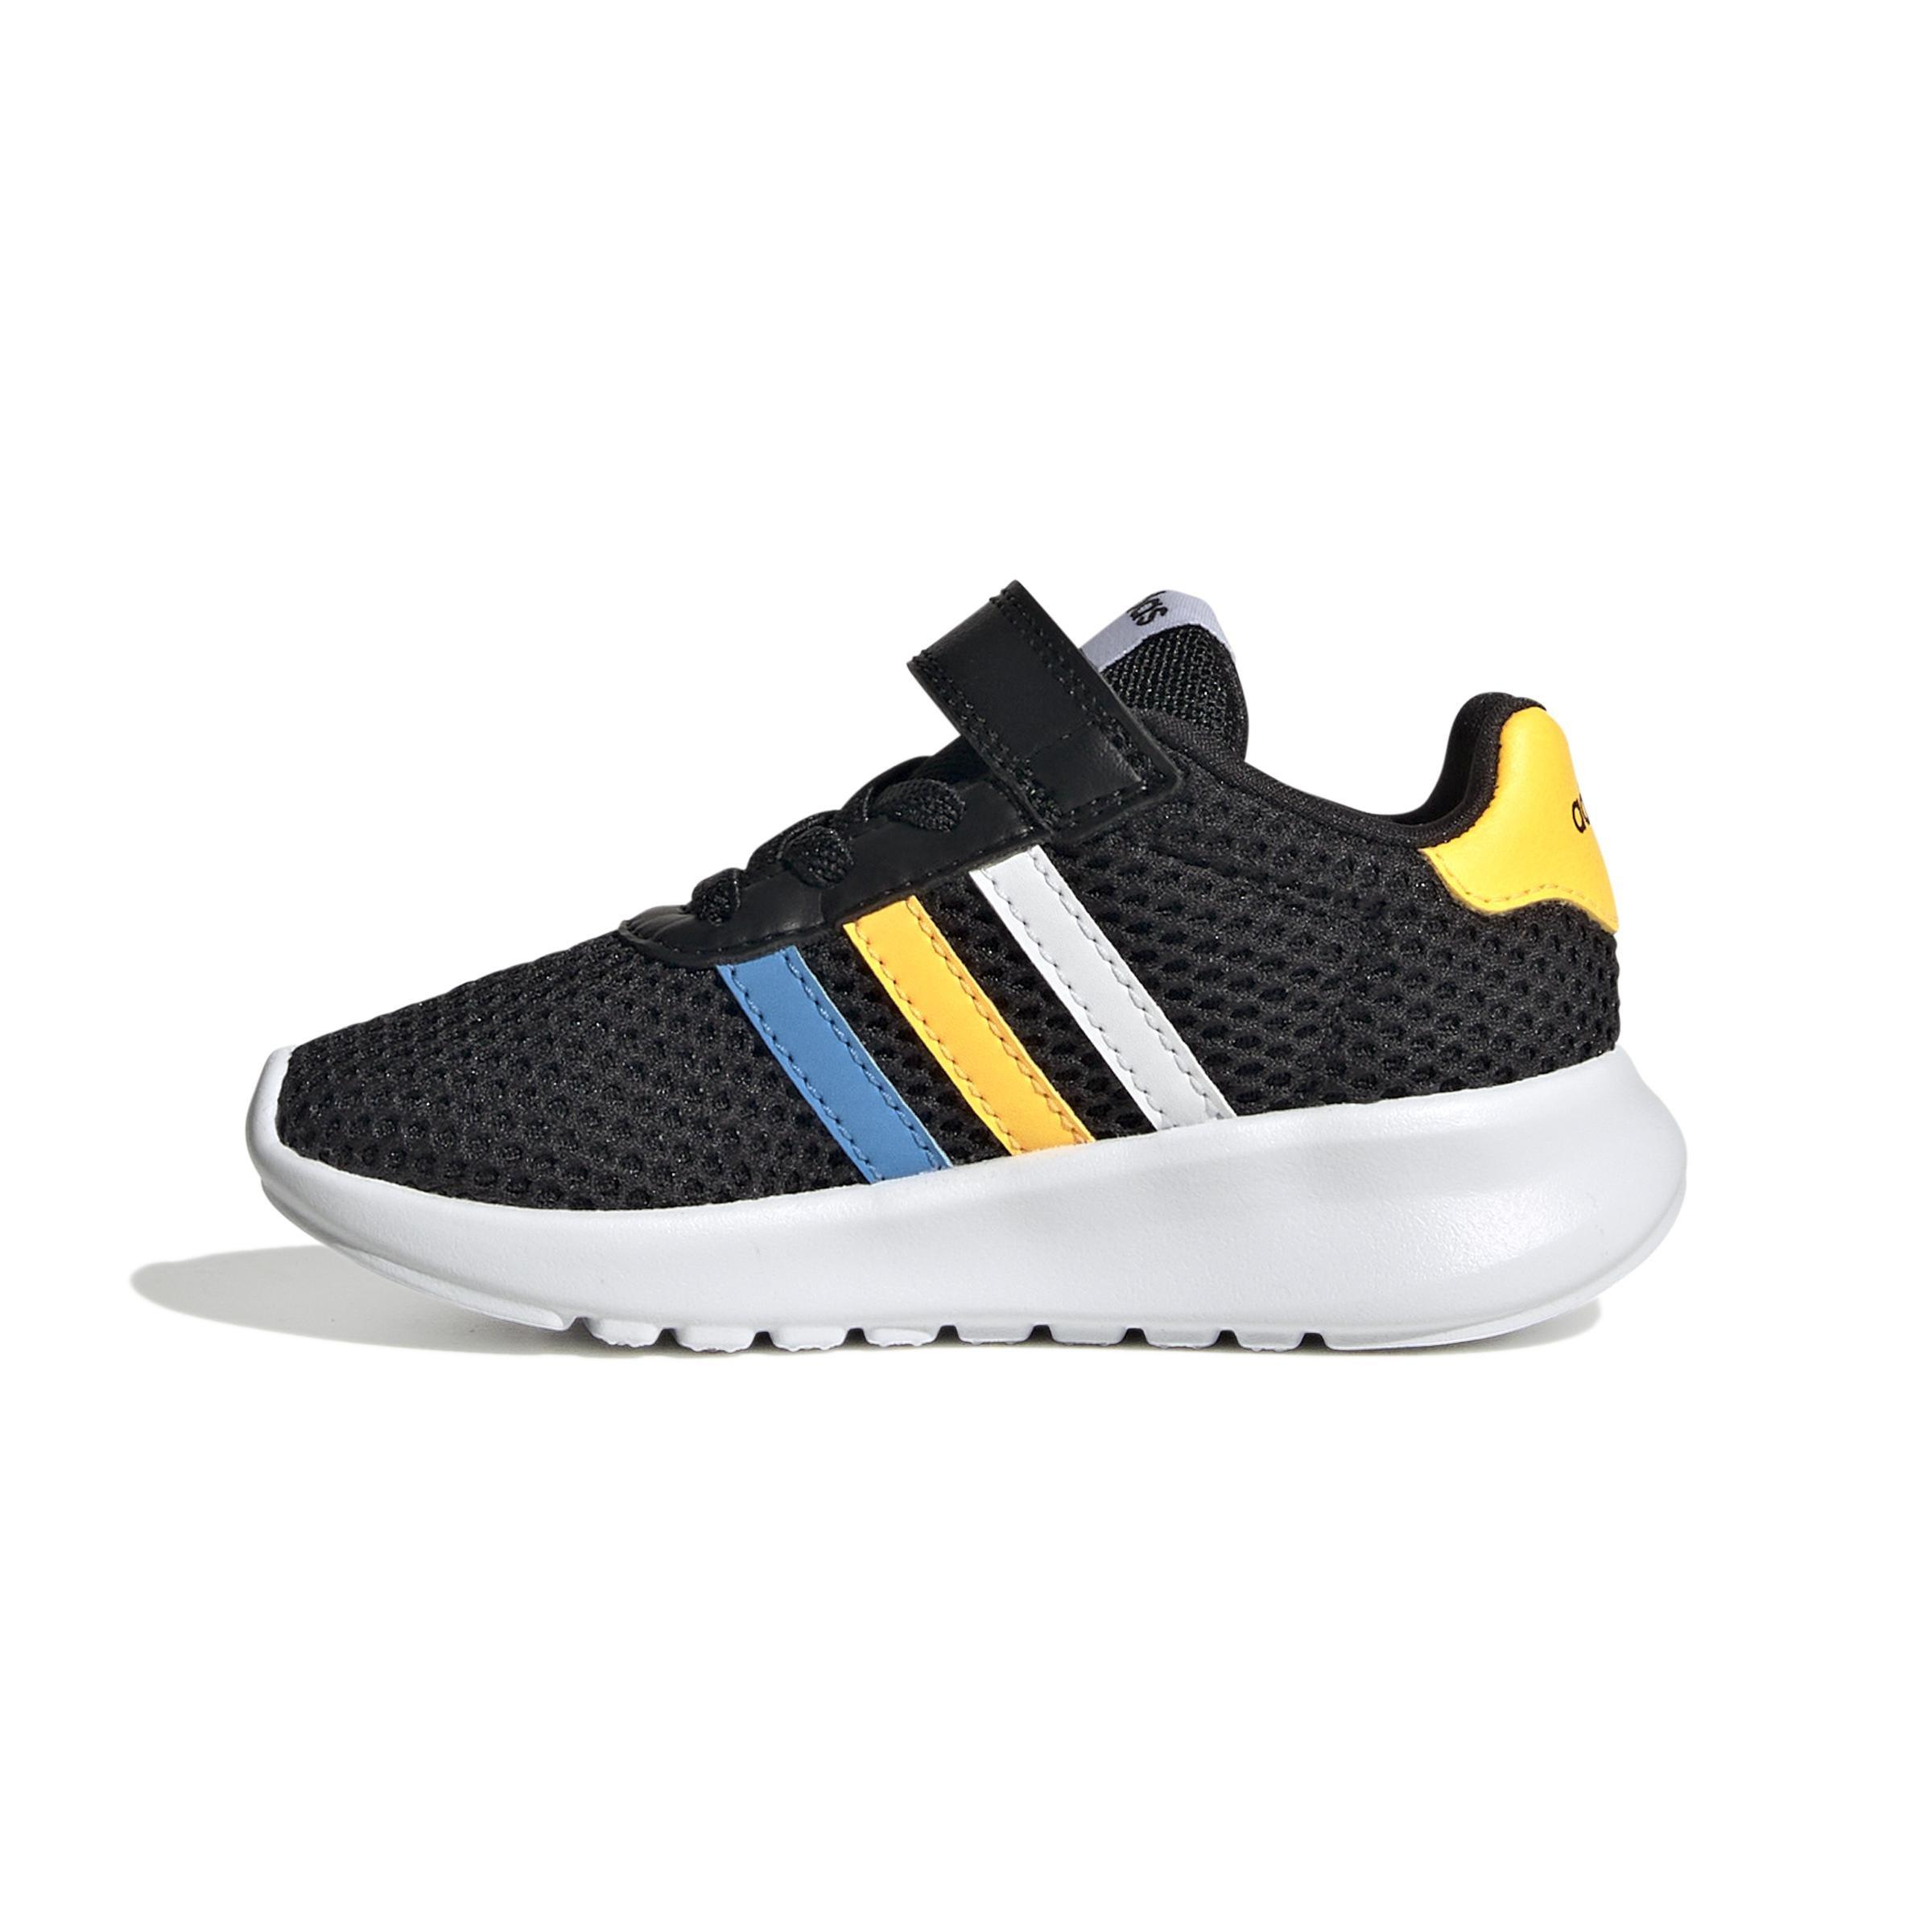 Lite Racer 3.0 Lifestyle Running Hook-and-Loop Top Strap Shoes core Unisex Infant | adidas Lebanon